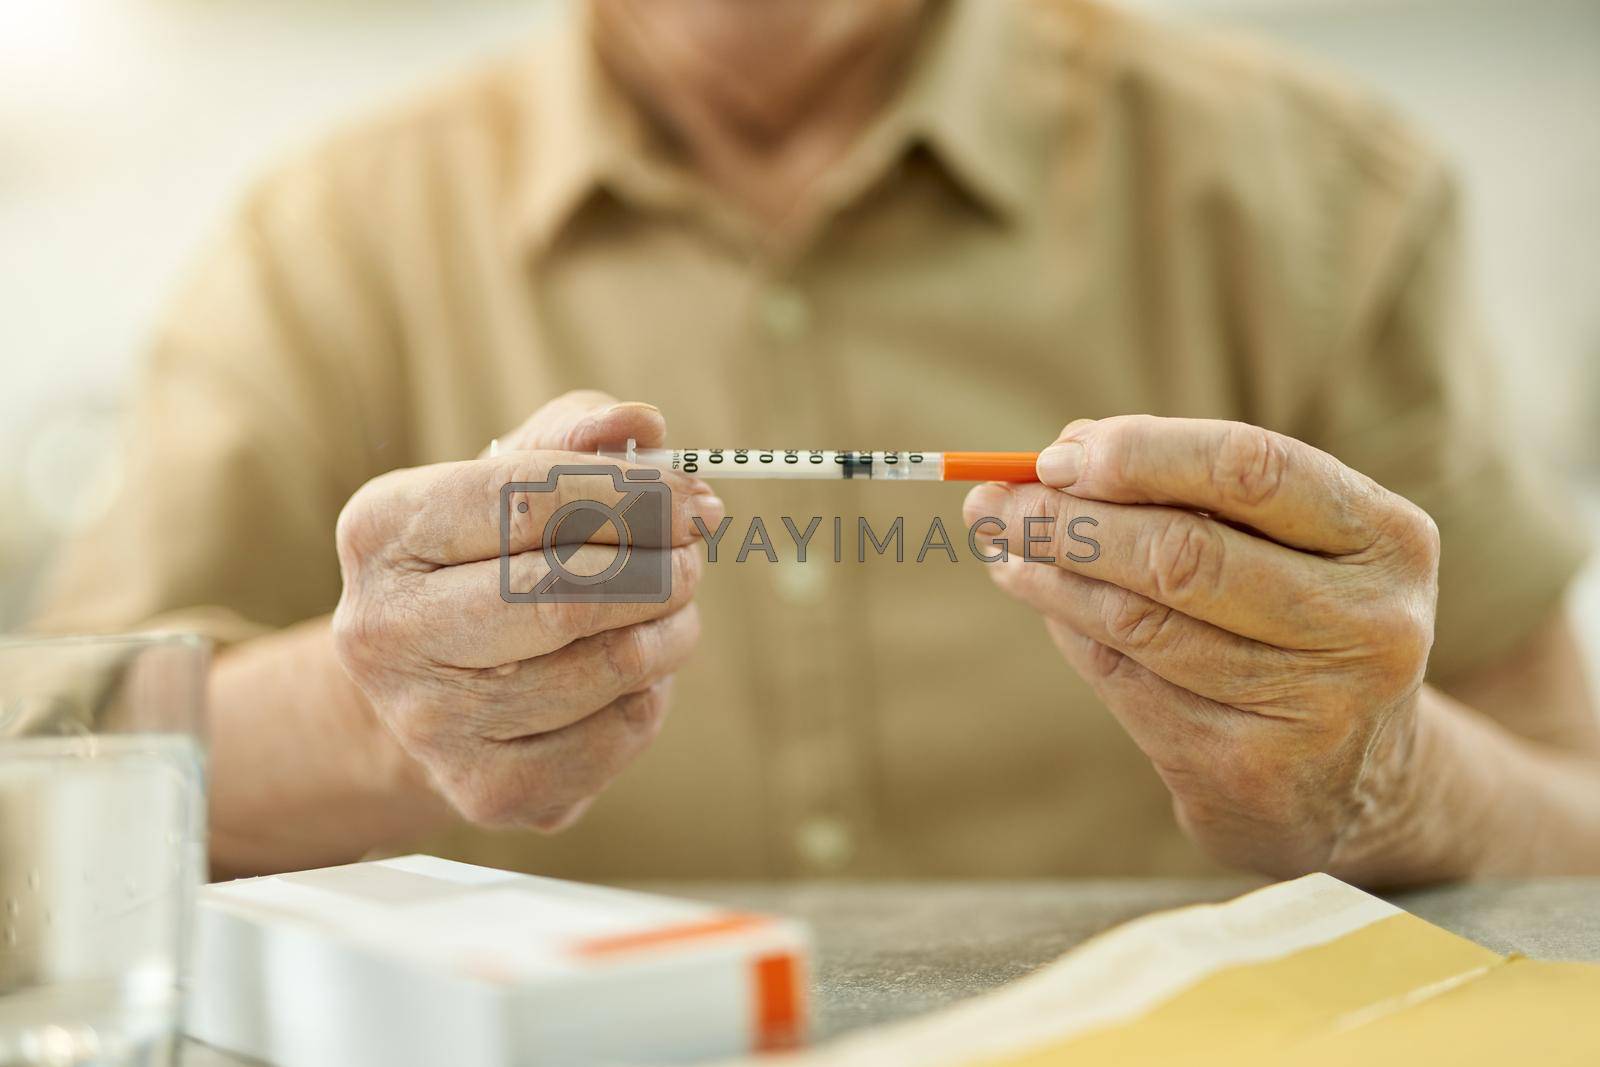 Royalty free image of Senior citizen hoding a thin syringe while at home by friendsstock